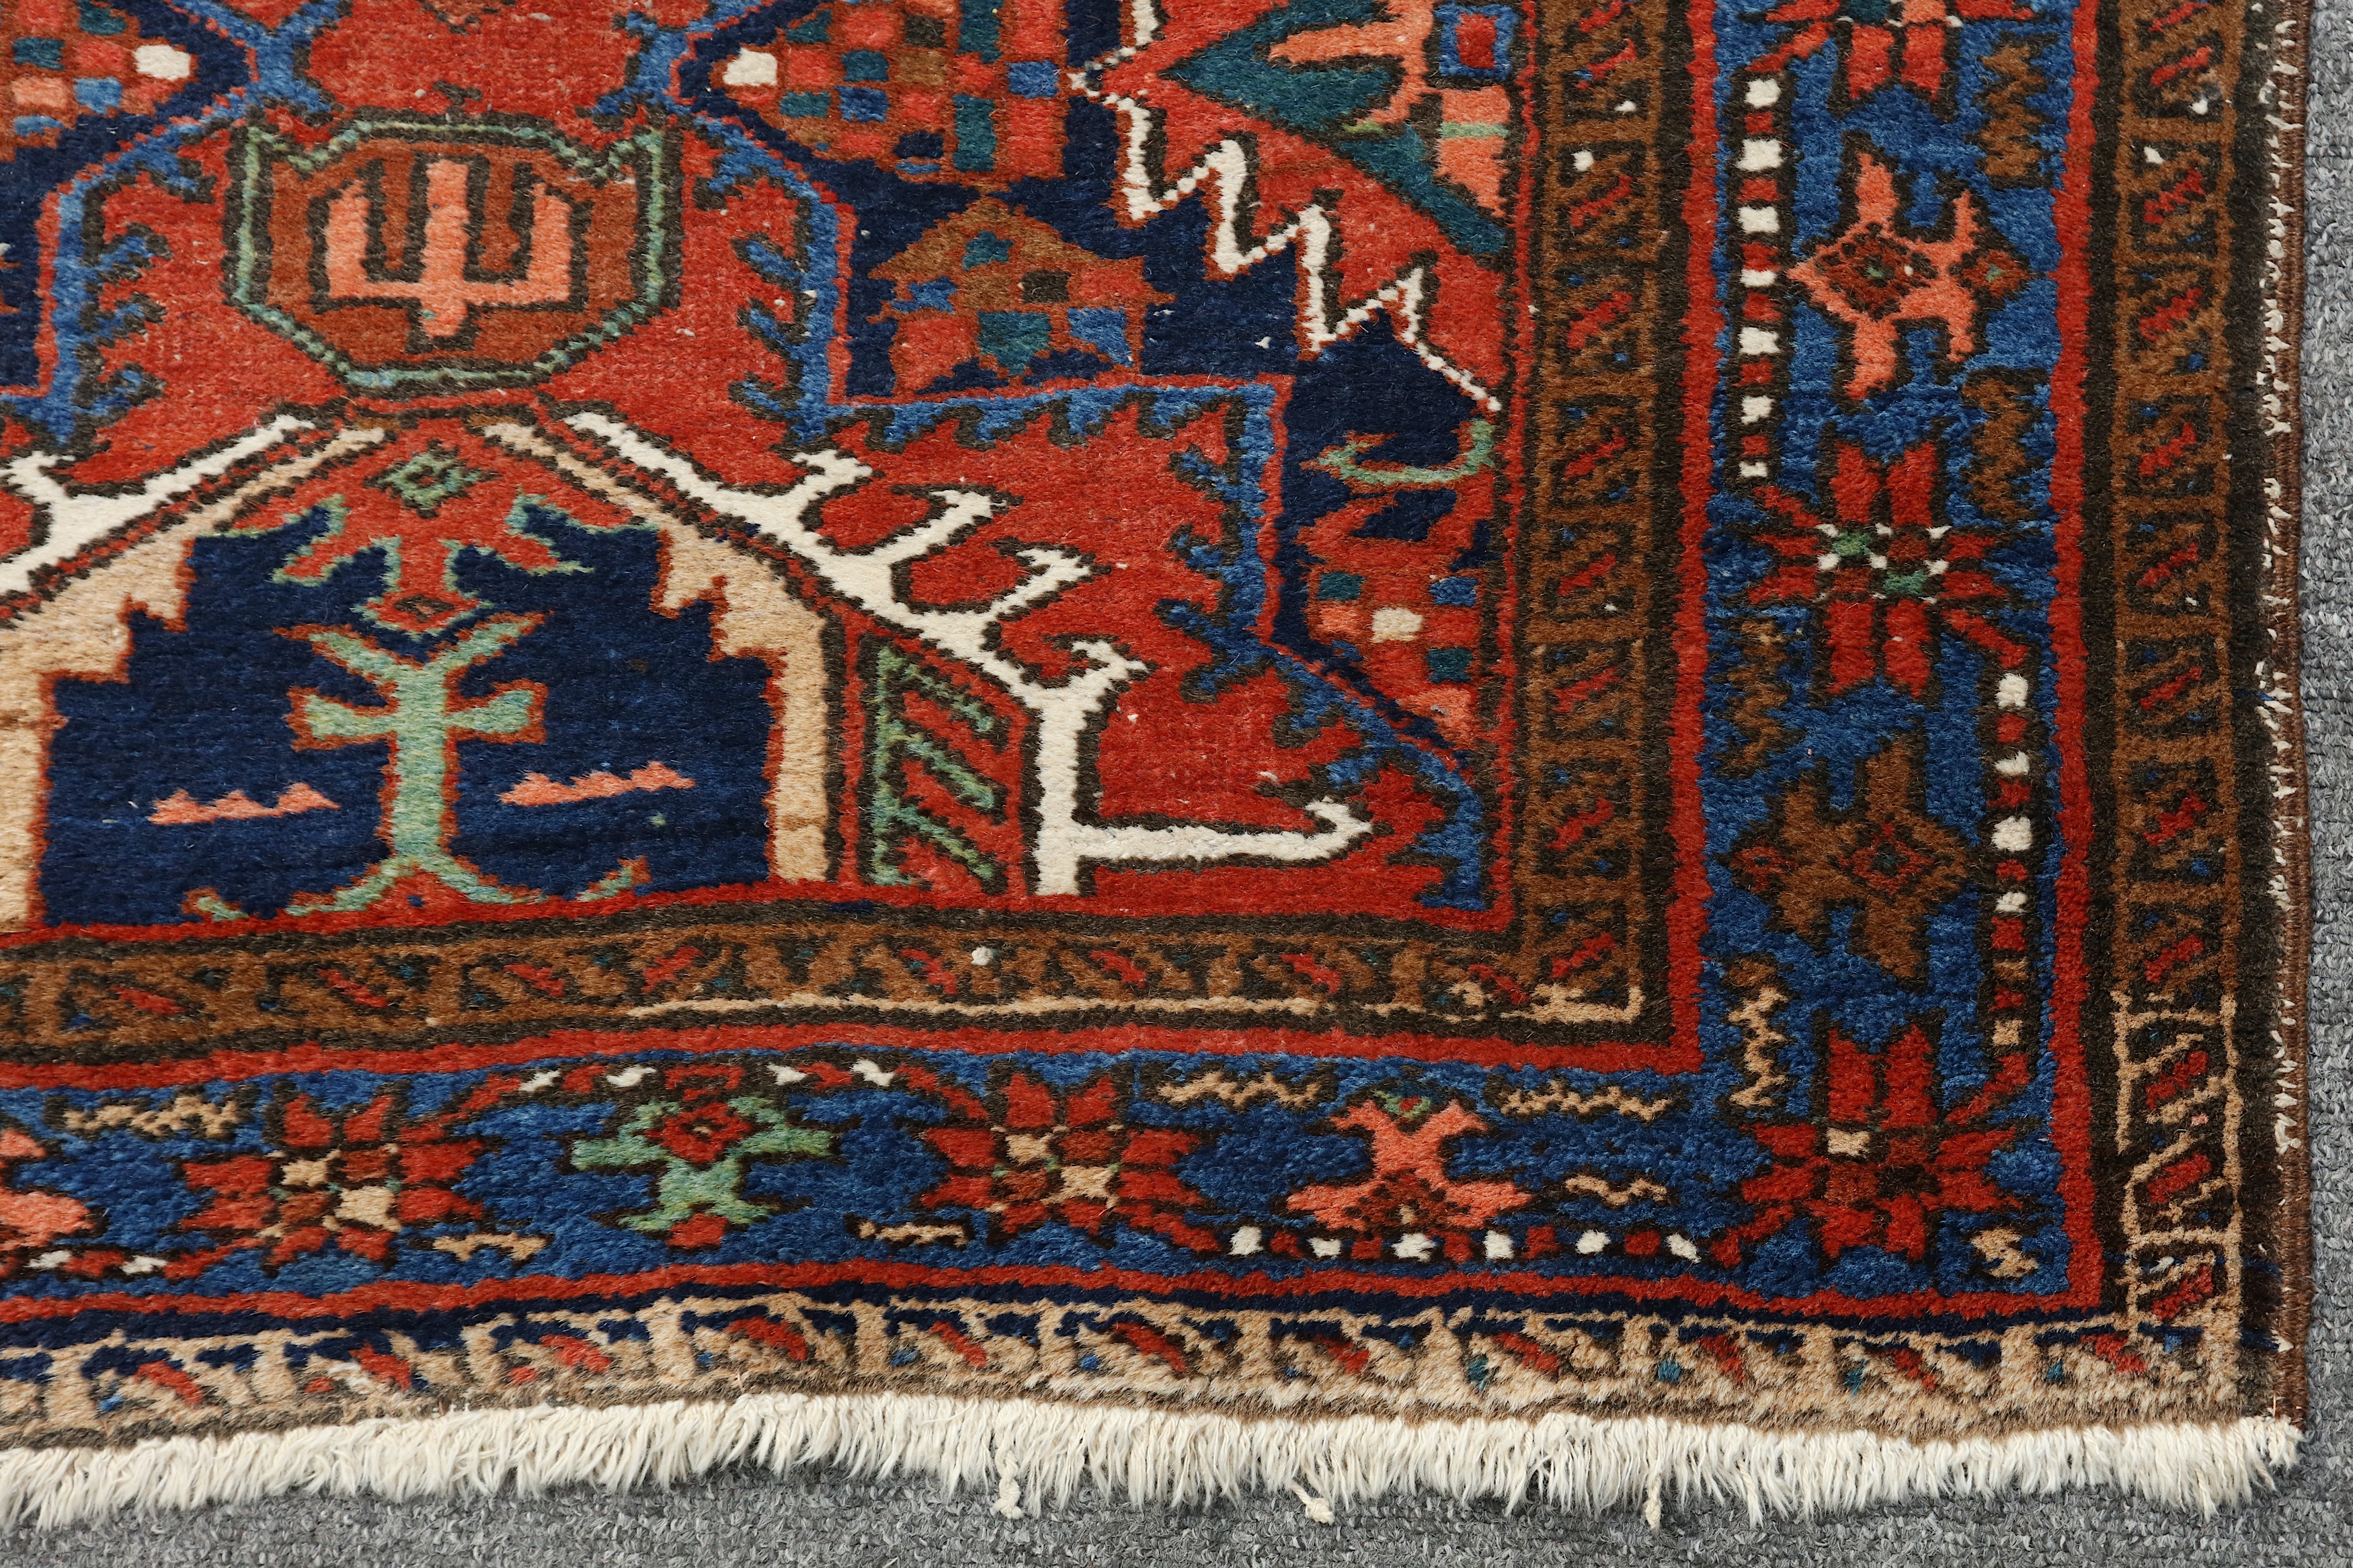 A FINE HERIZ RUNNER, NORTH-WEST PERSIA - Image 6 of 7